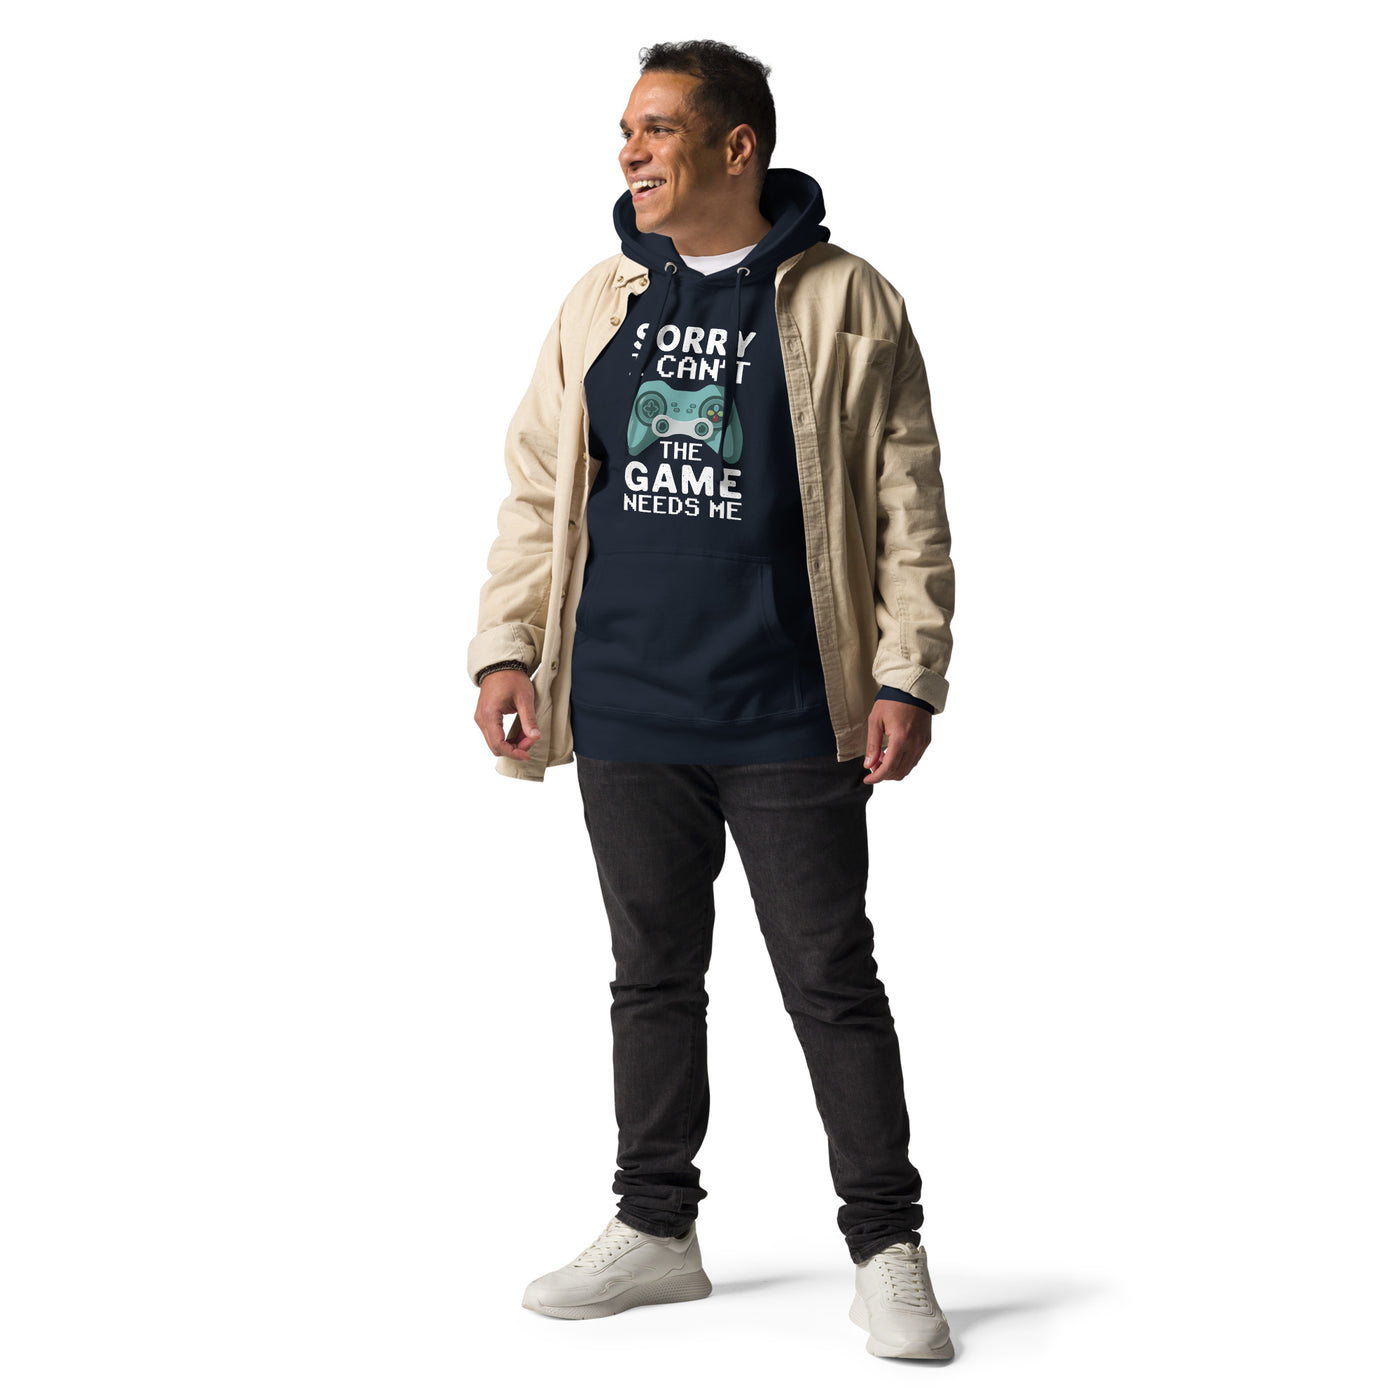 Sorry! I can't, The Game needs me - Unisex Hoodie